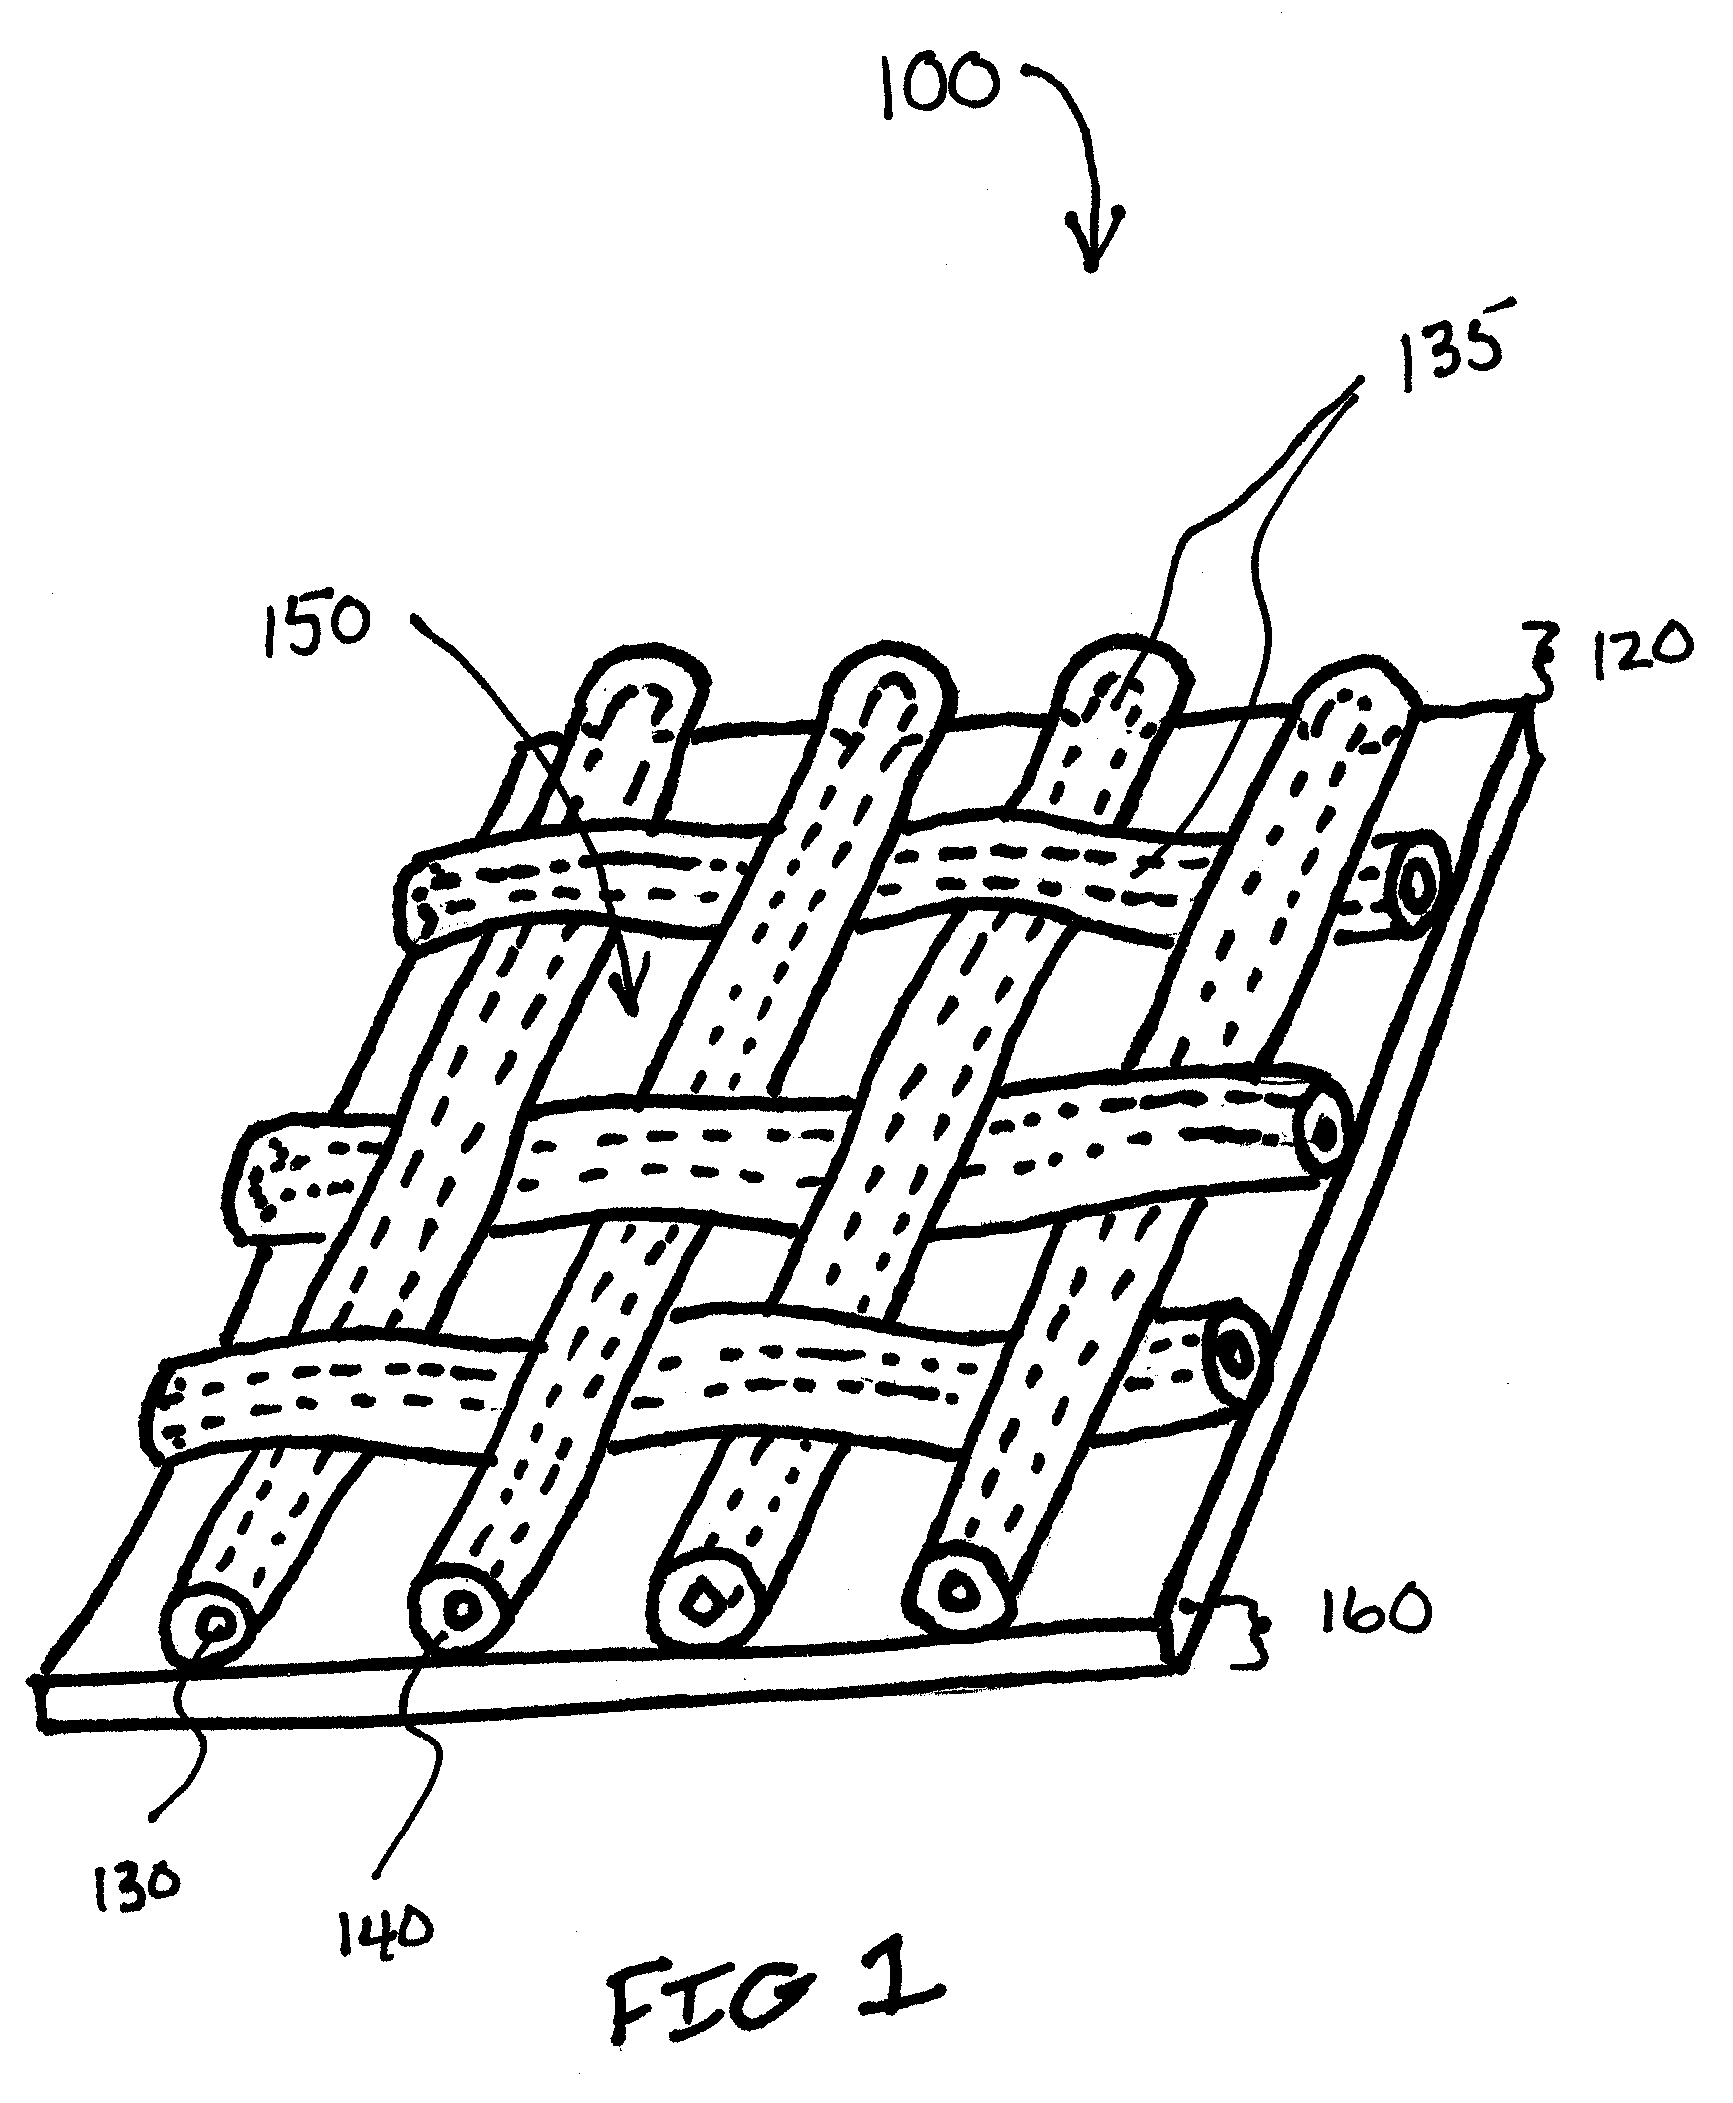 Apparatus and Method for Limiting Surgical Adhesions